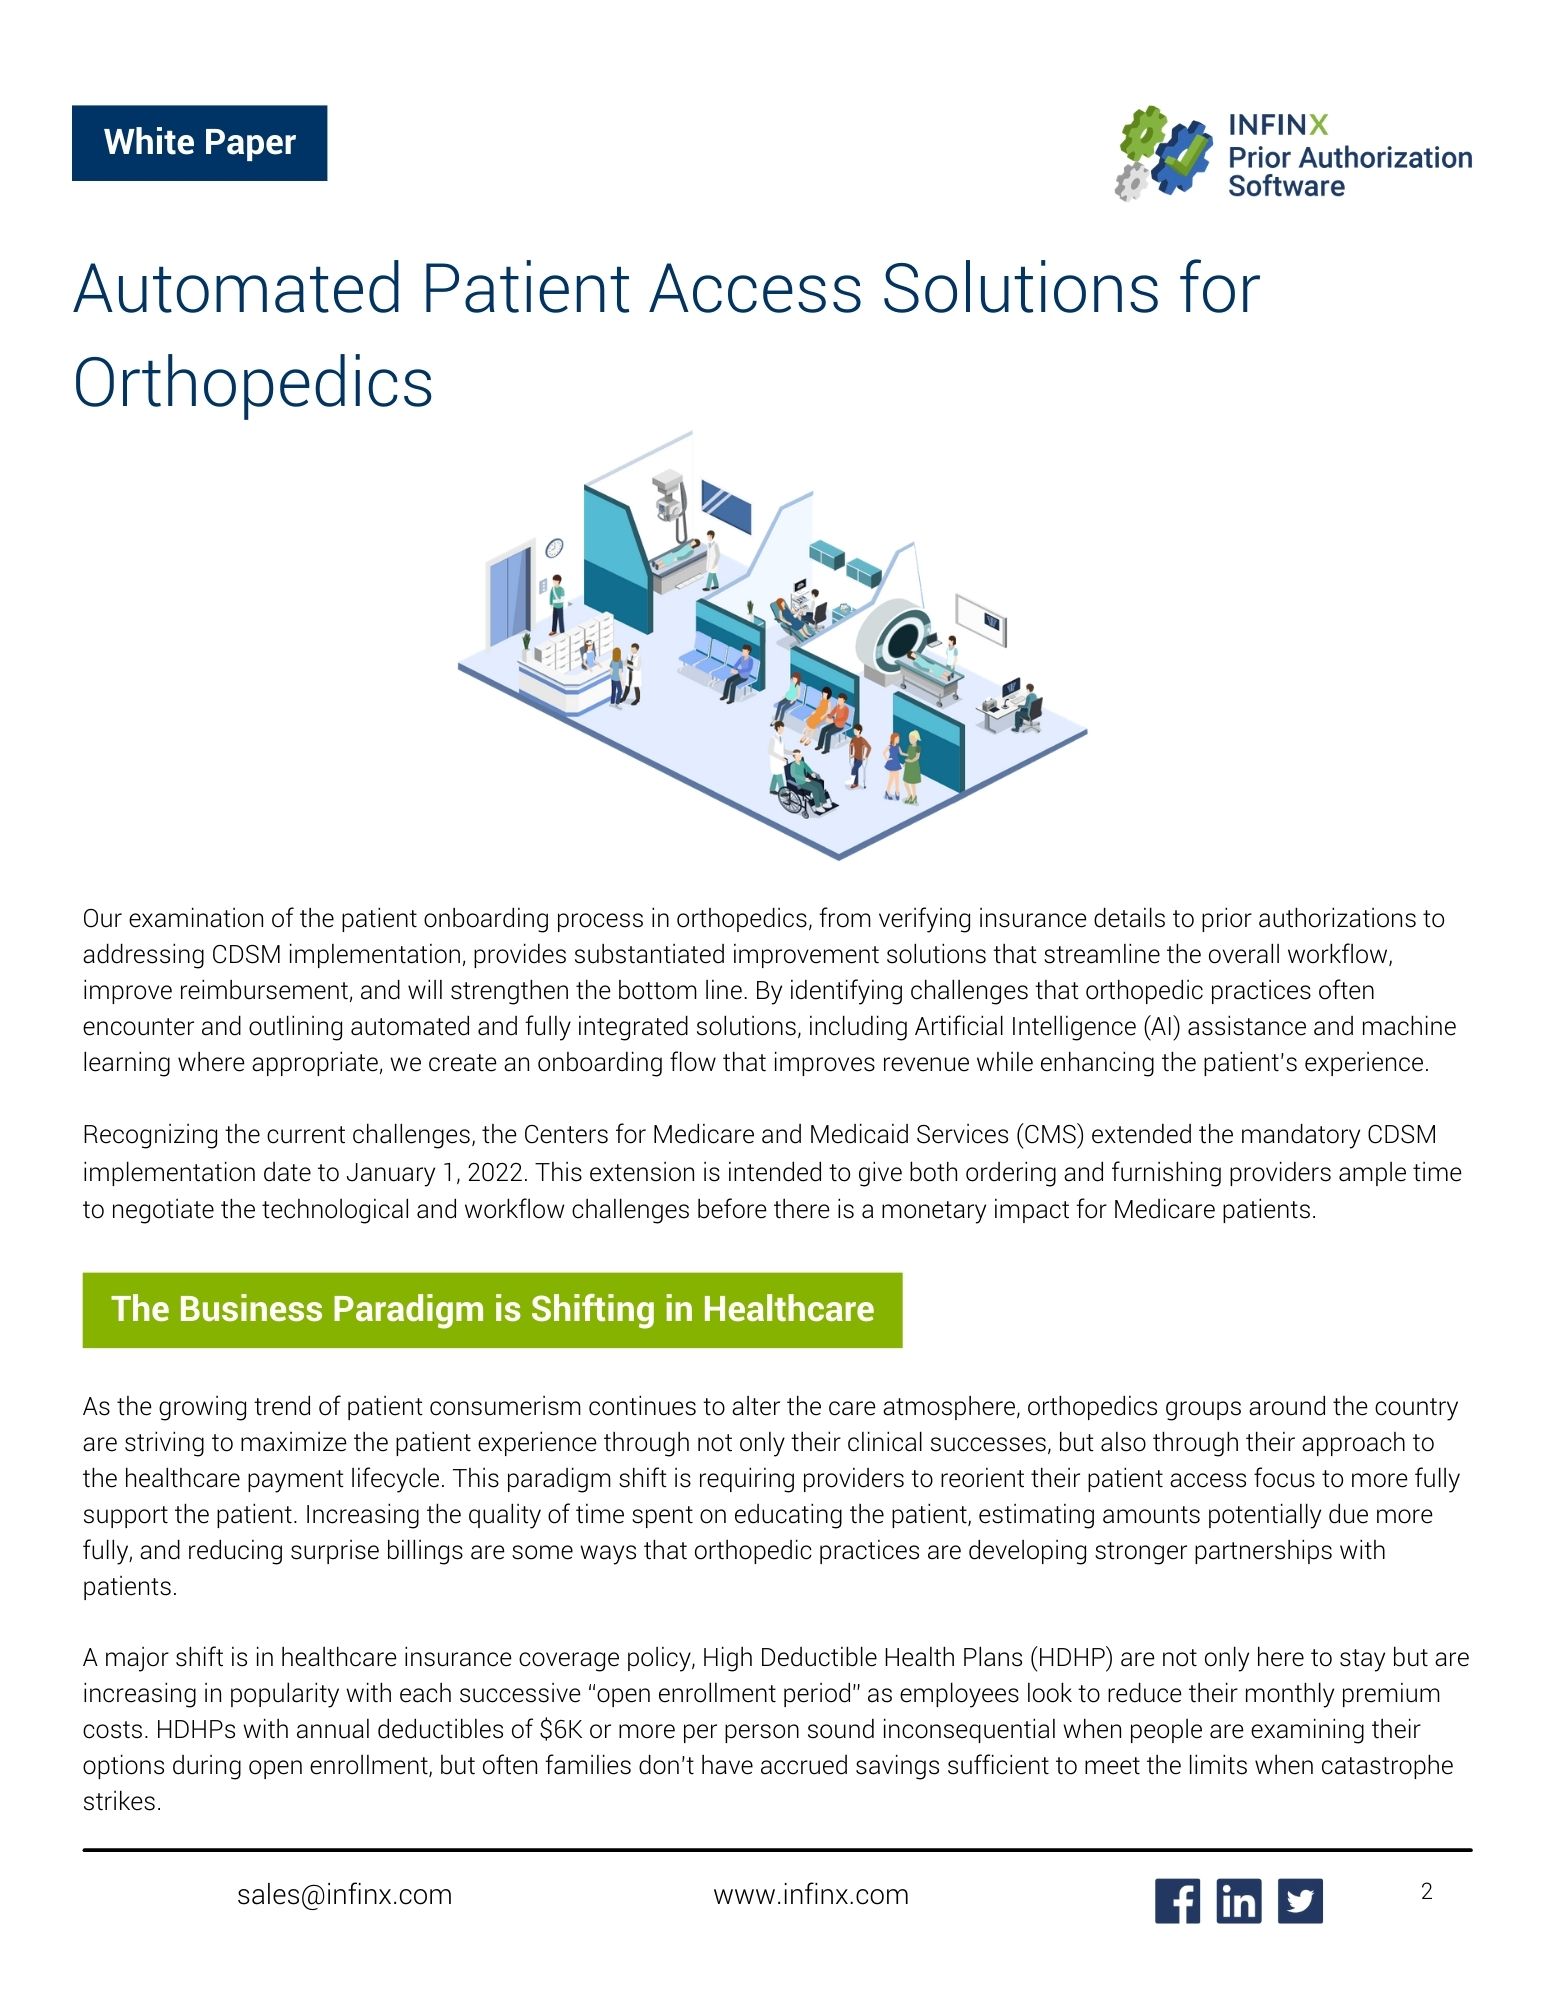 Infinx - White Paper - Automated Patient Access Solutions for Orthopedics - May 2021 2